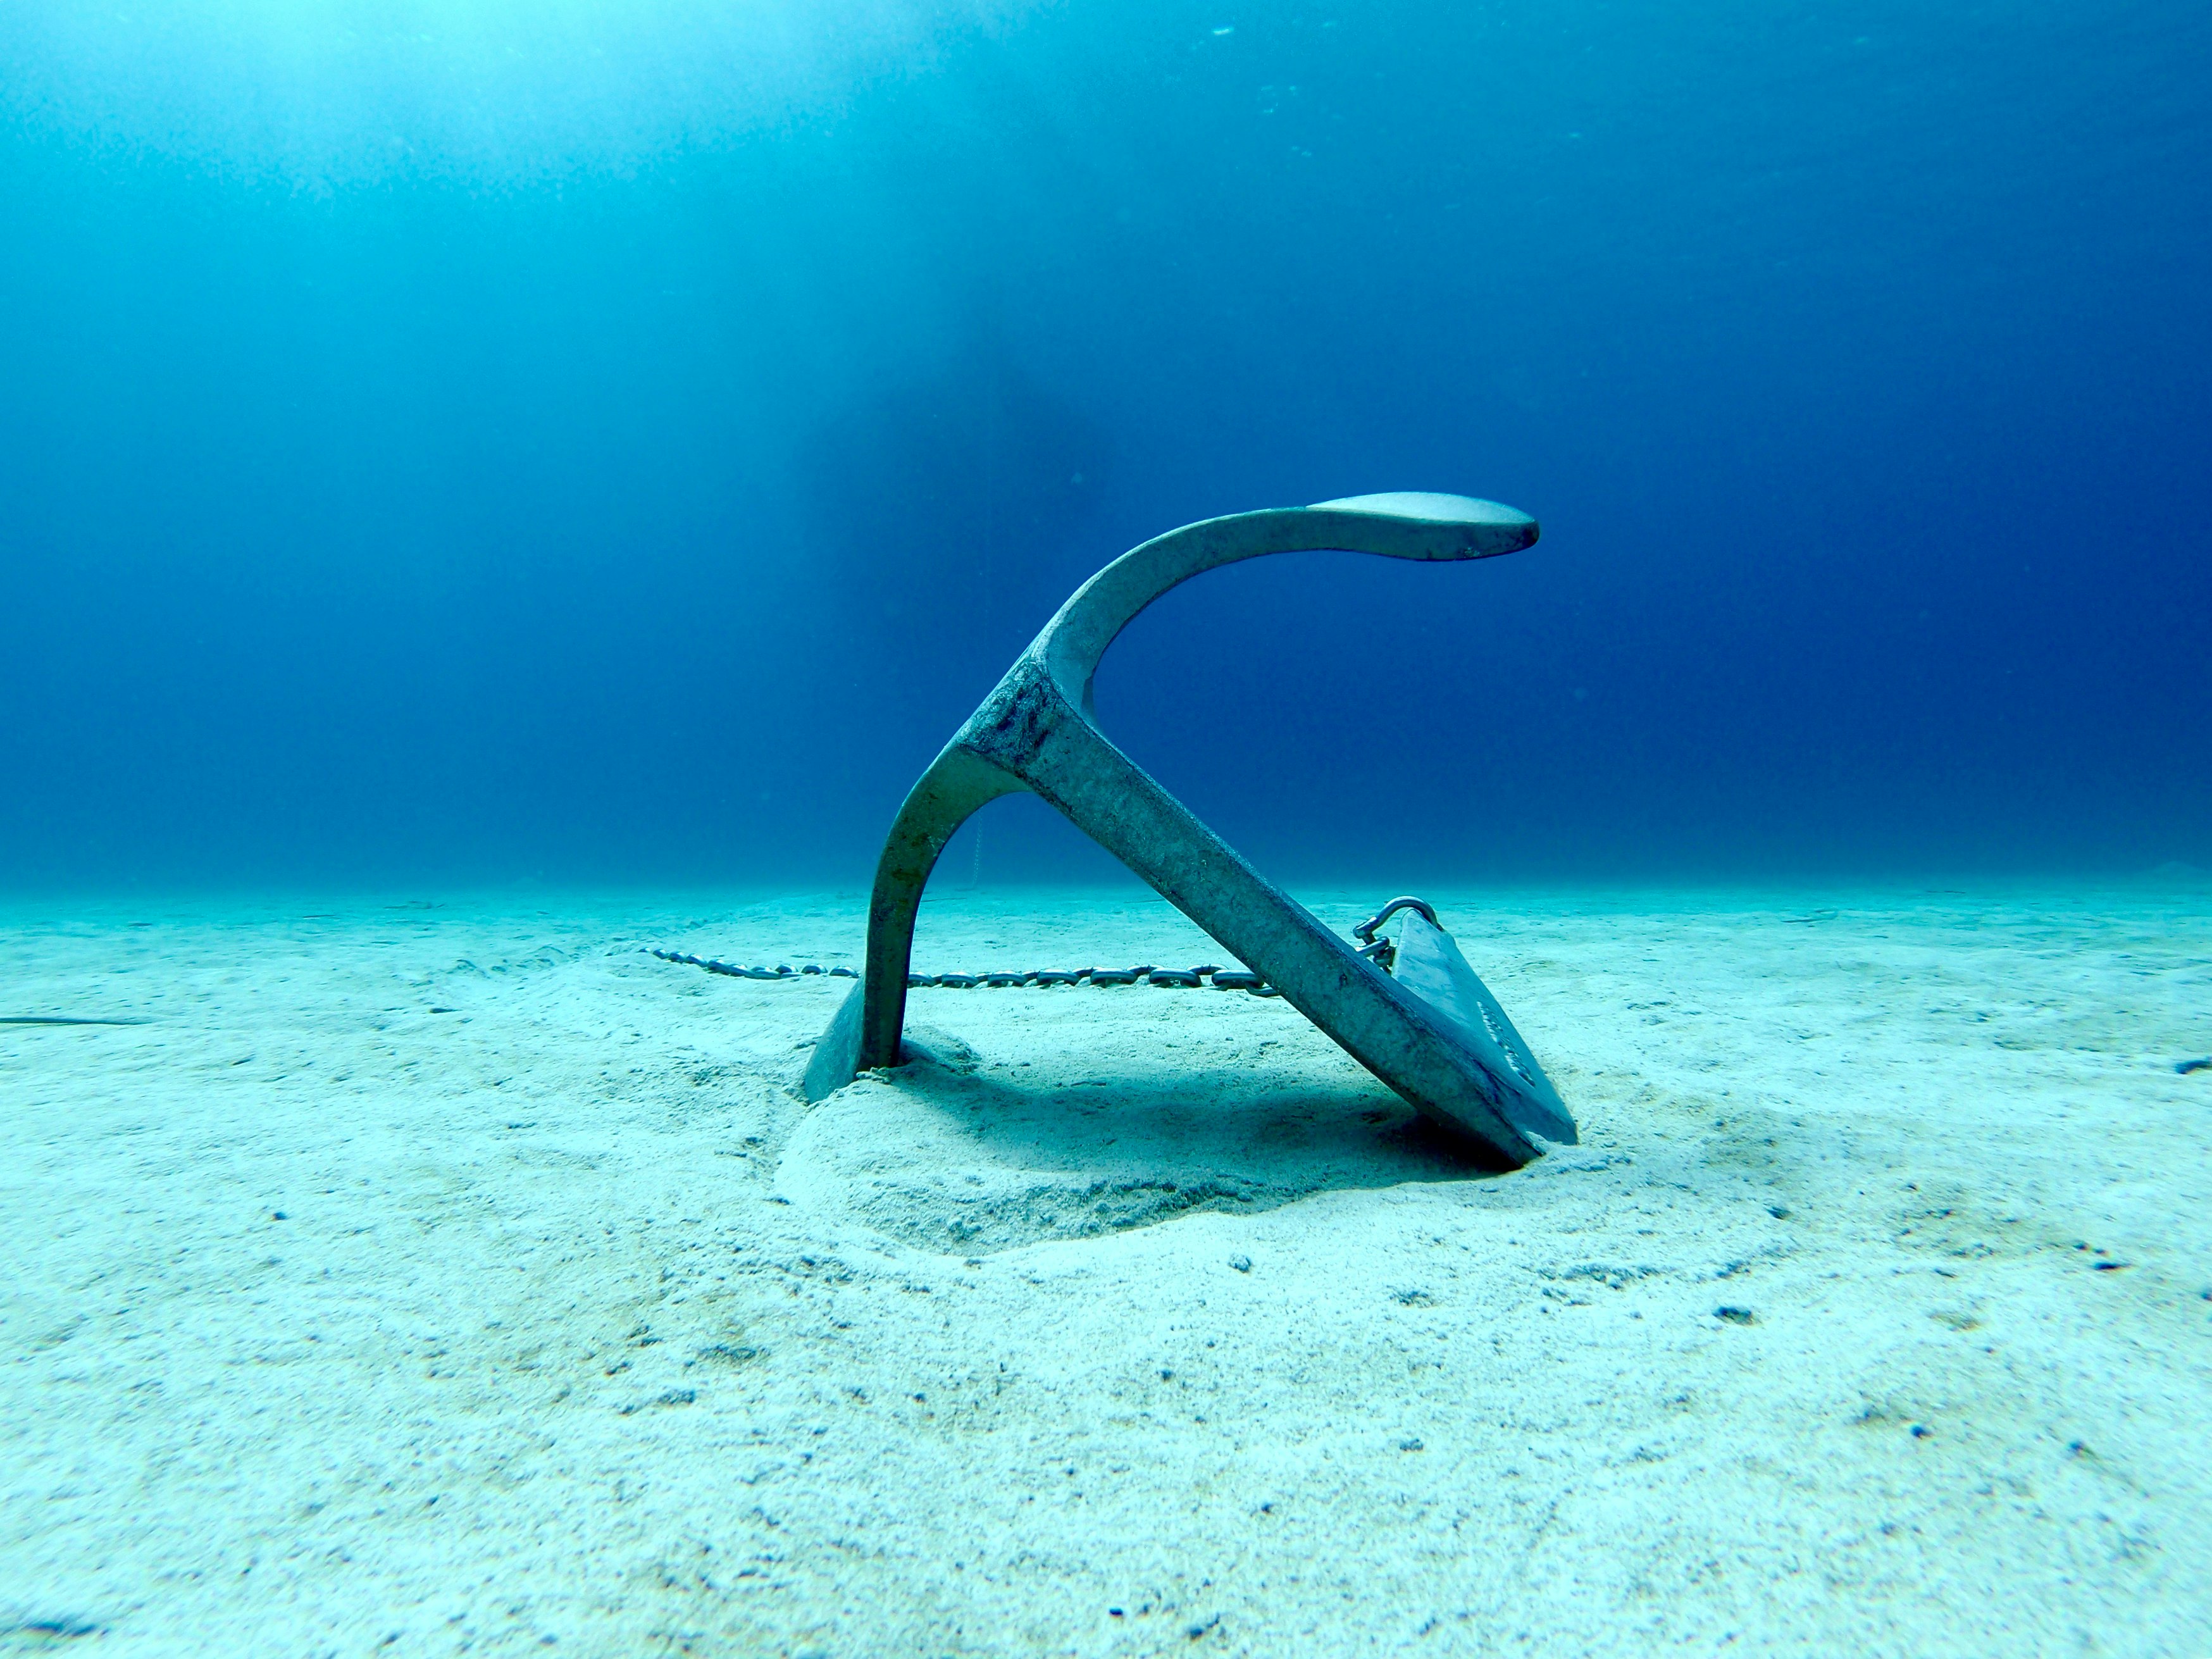 Anchor lying on the sand in the crystal blue waters of the Mediterranean